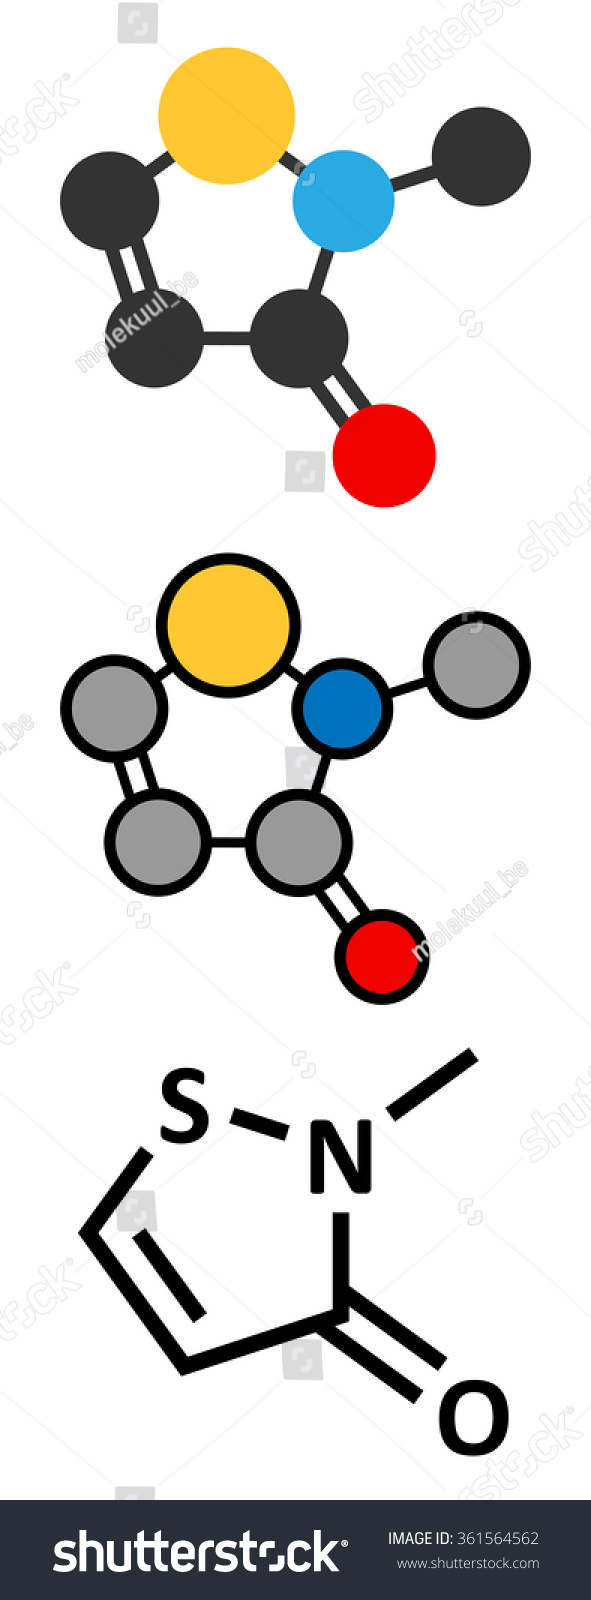 SVG of Methylisothiazolinone (MIT, MI) preservative molecule. Often used in water-based products, e.g. cosmetics. Stylized 2D renderings and conventional skeletal formula.  svg